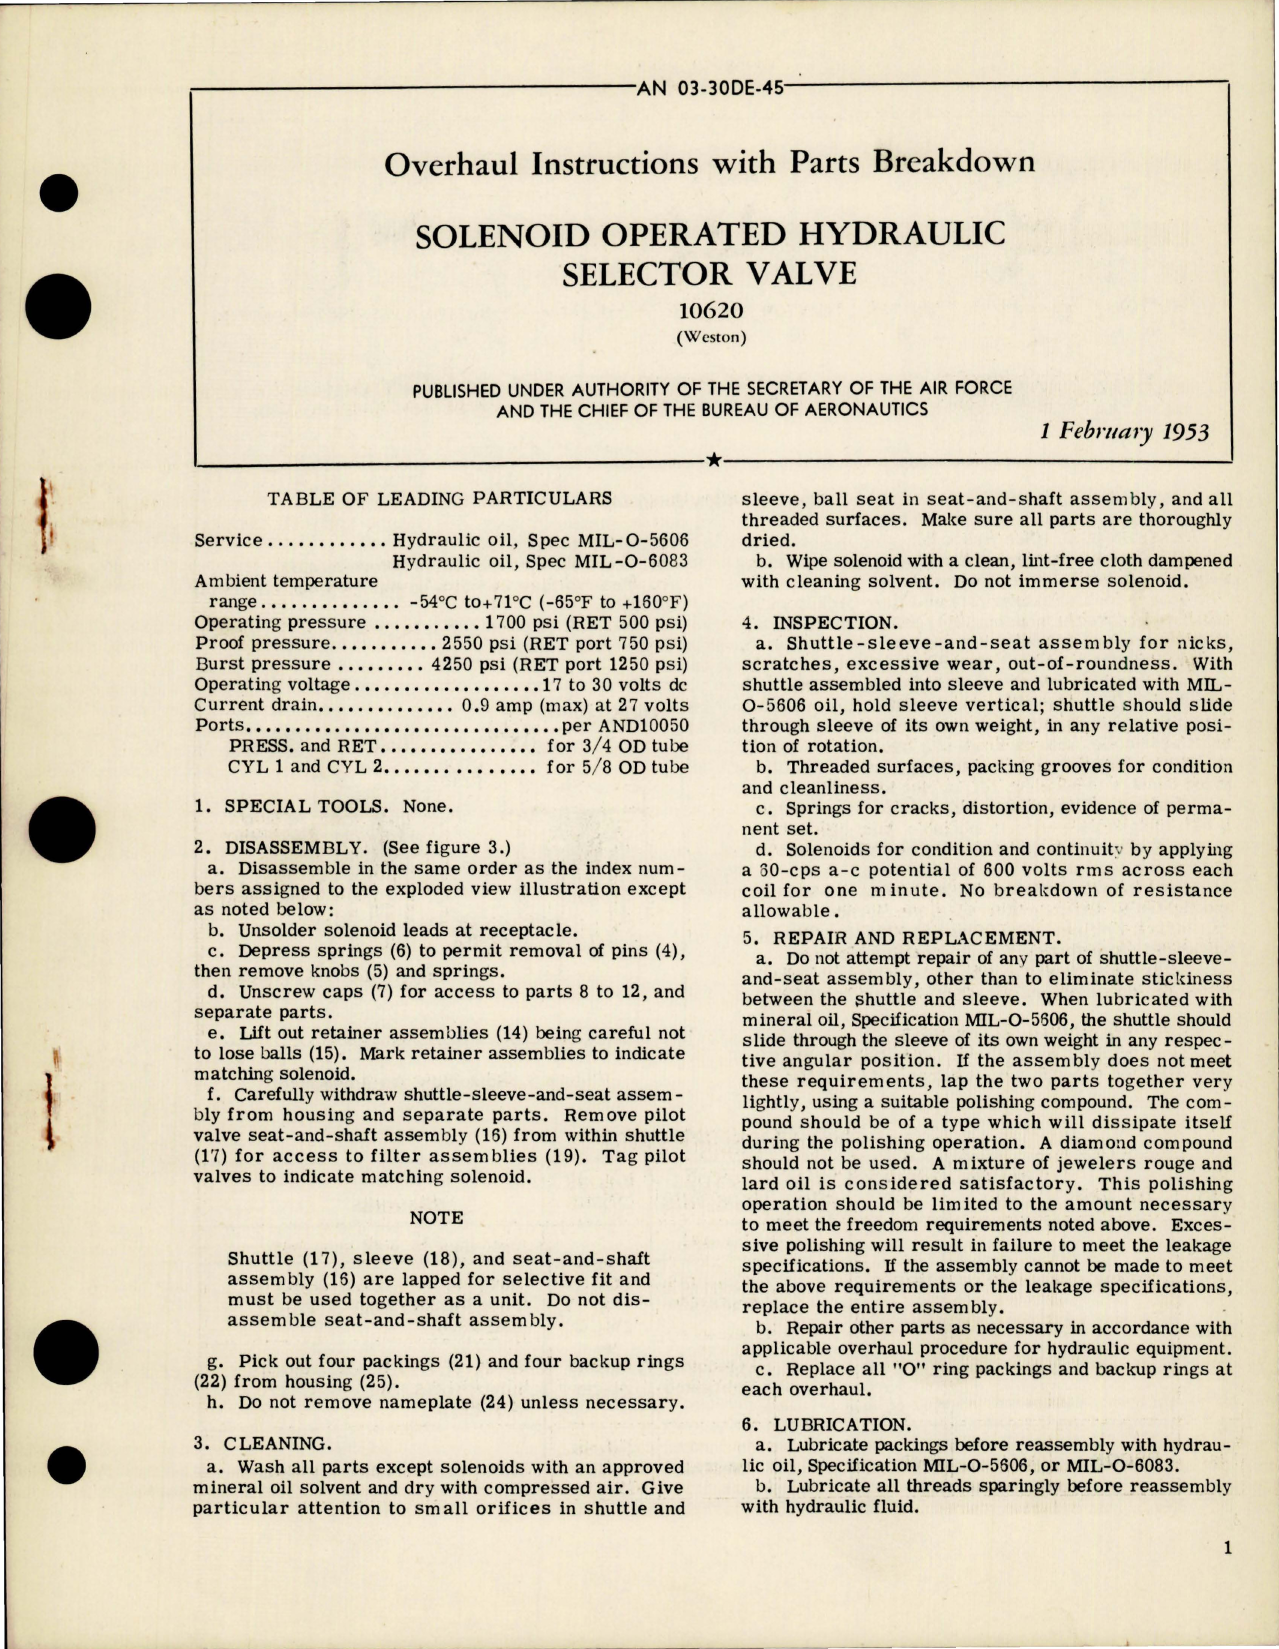 Sample page 1 from AirCorps Library document: Overhaul Instructions with Parts for Solenoid Operated Hydraulic Selector Valve - 10620